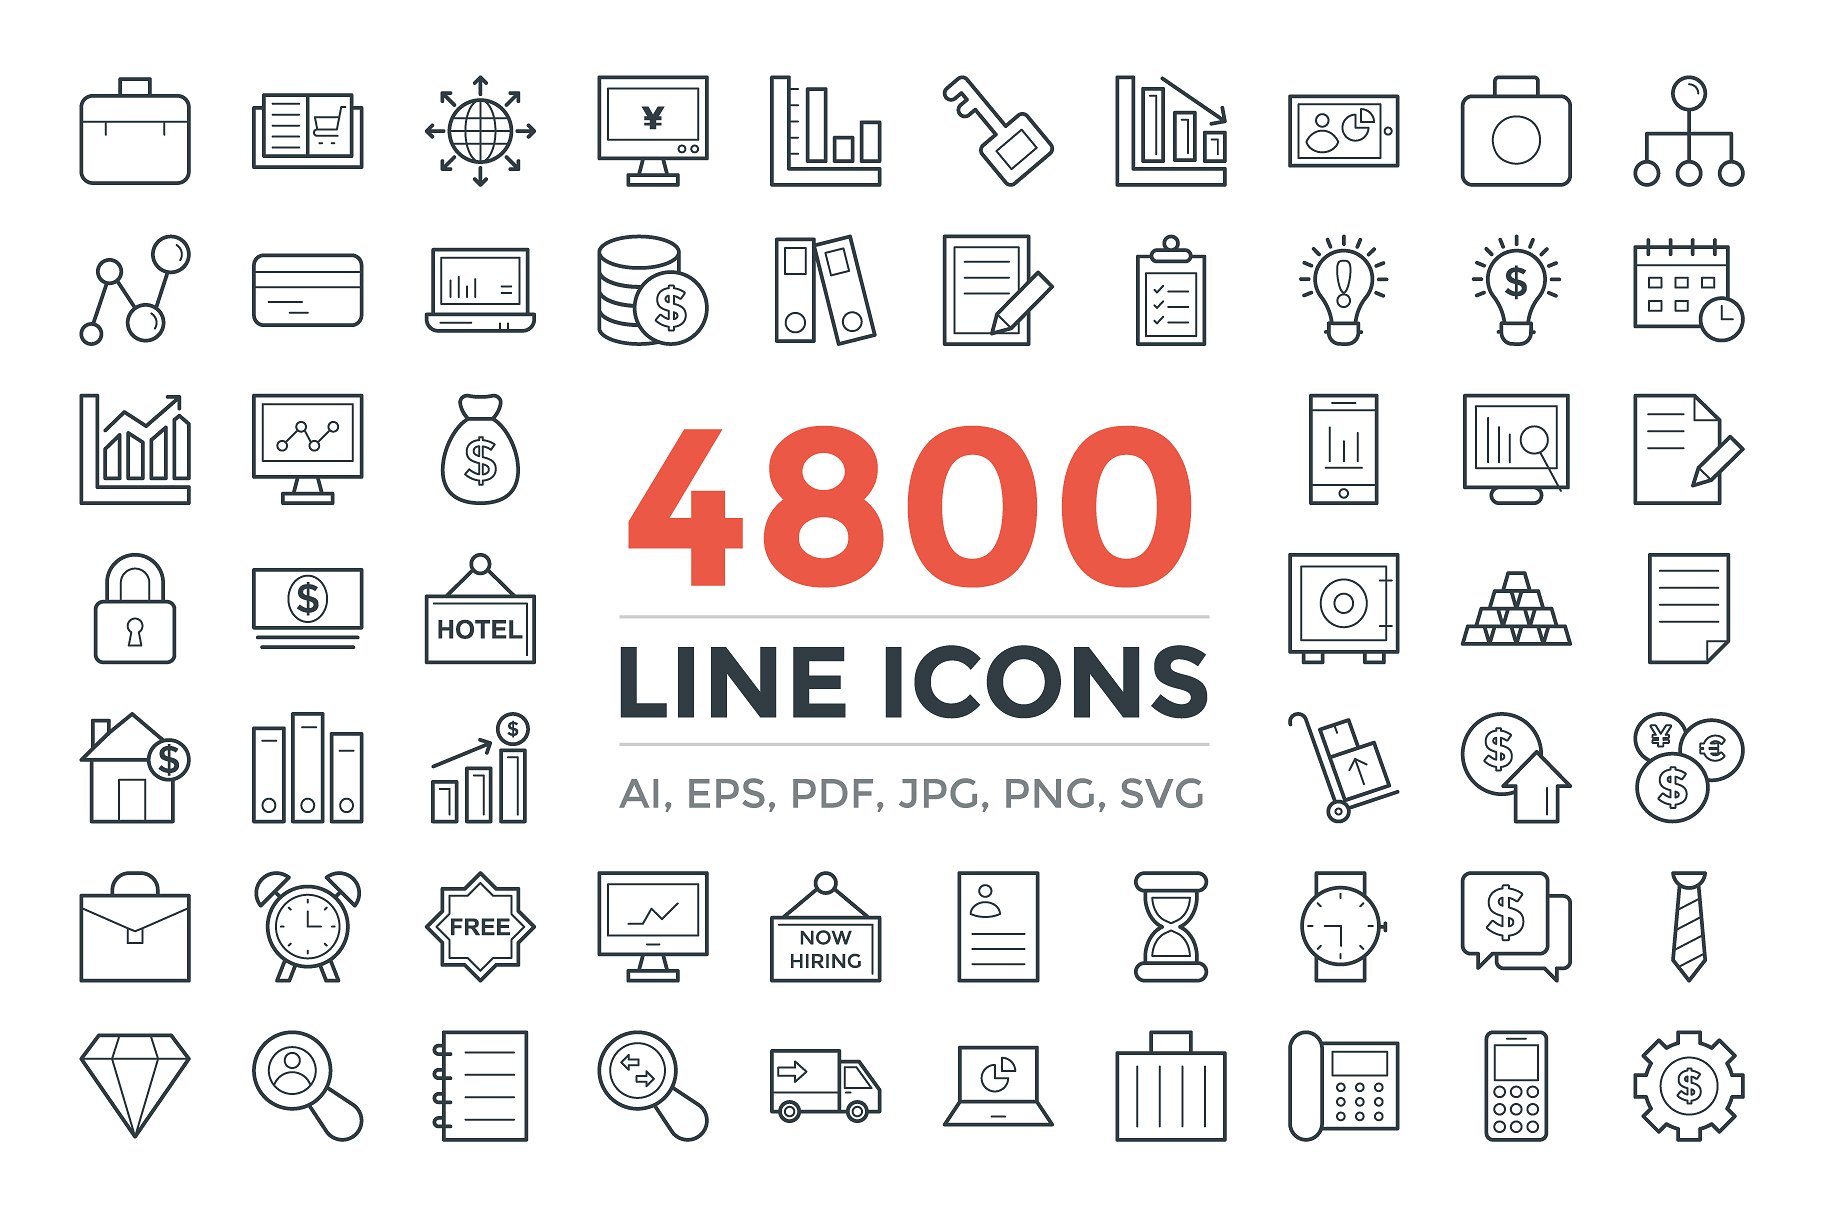 Download 50 Useful Line Icon Sets For Modern Designers Decolore Net SVG, PNG, EPS, DXF File